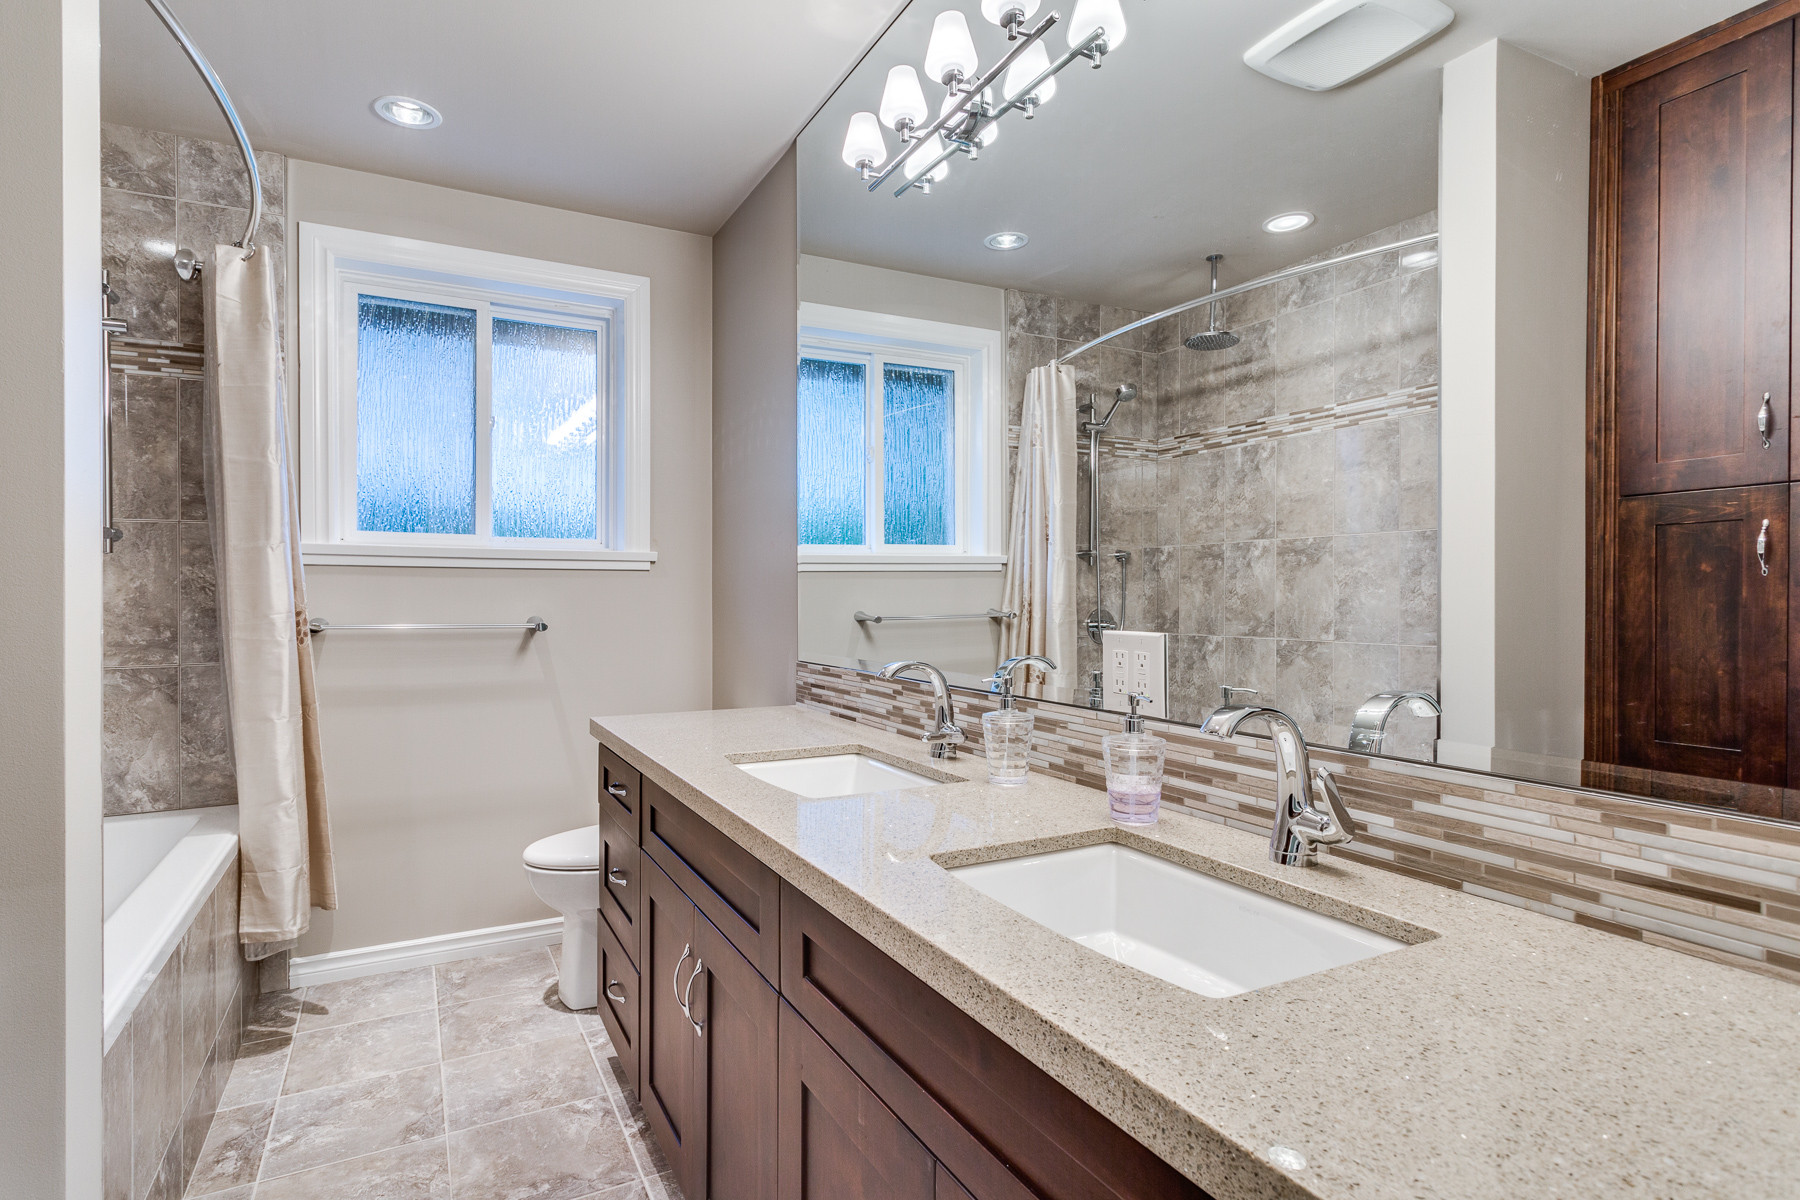 Complete Bathroom Remodel Cost
 The Cost of a Vancouver Bathroom Renovation